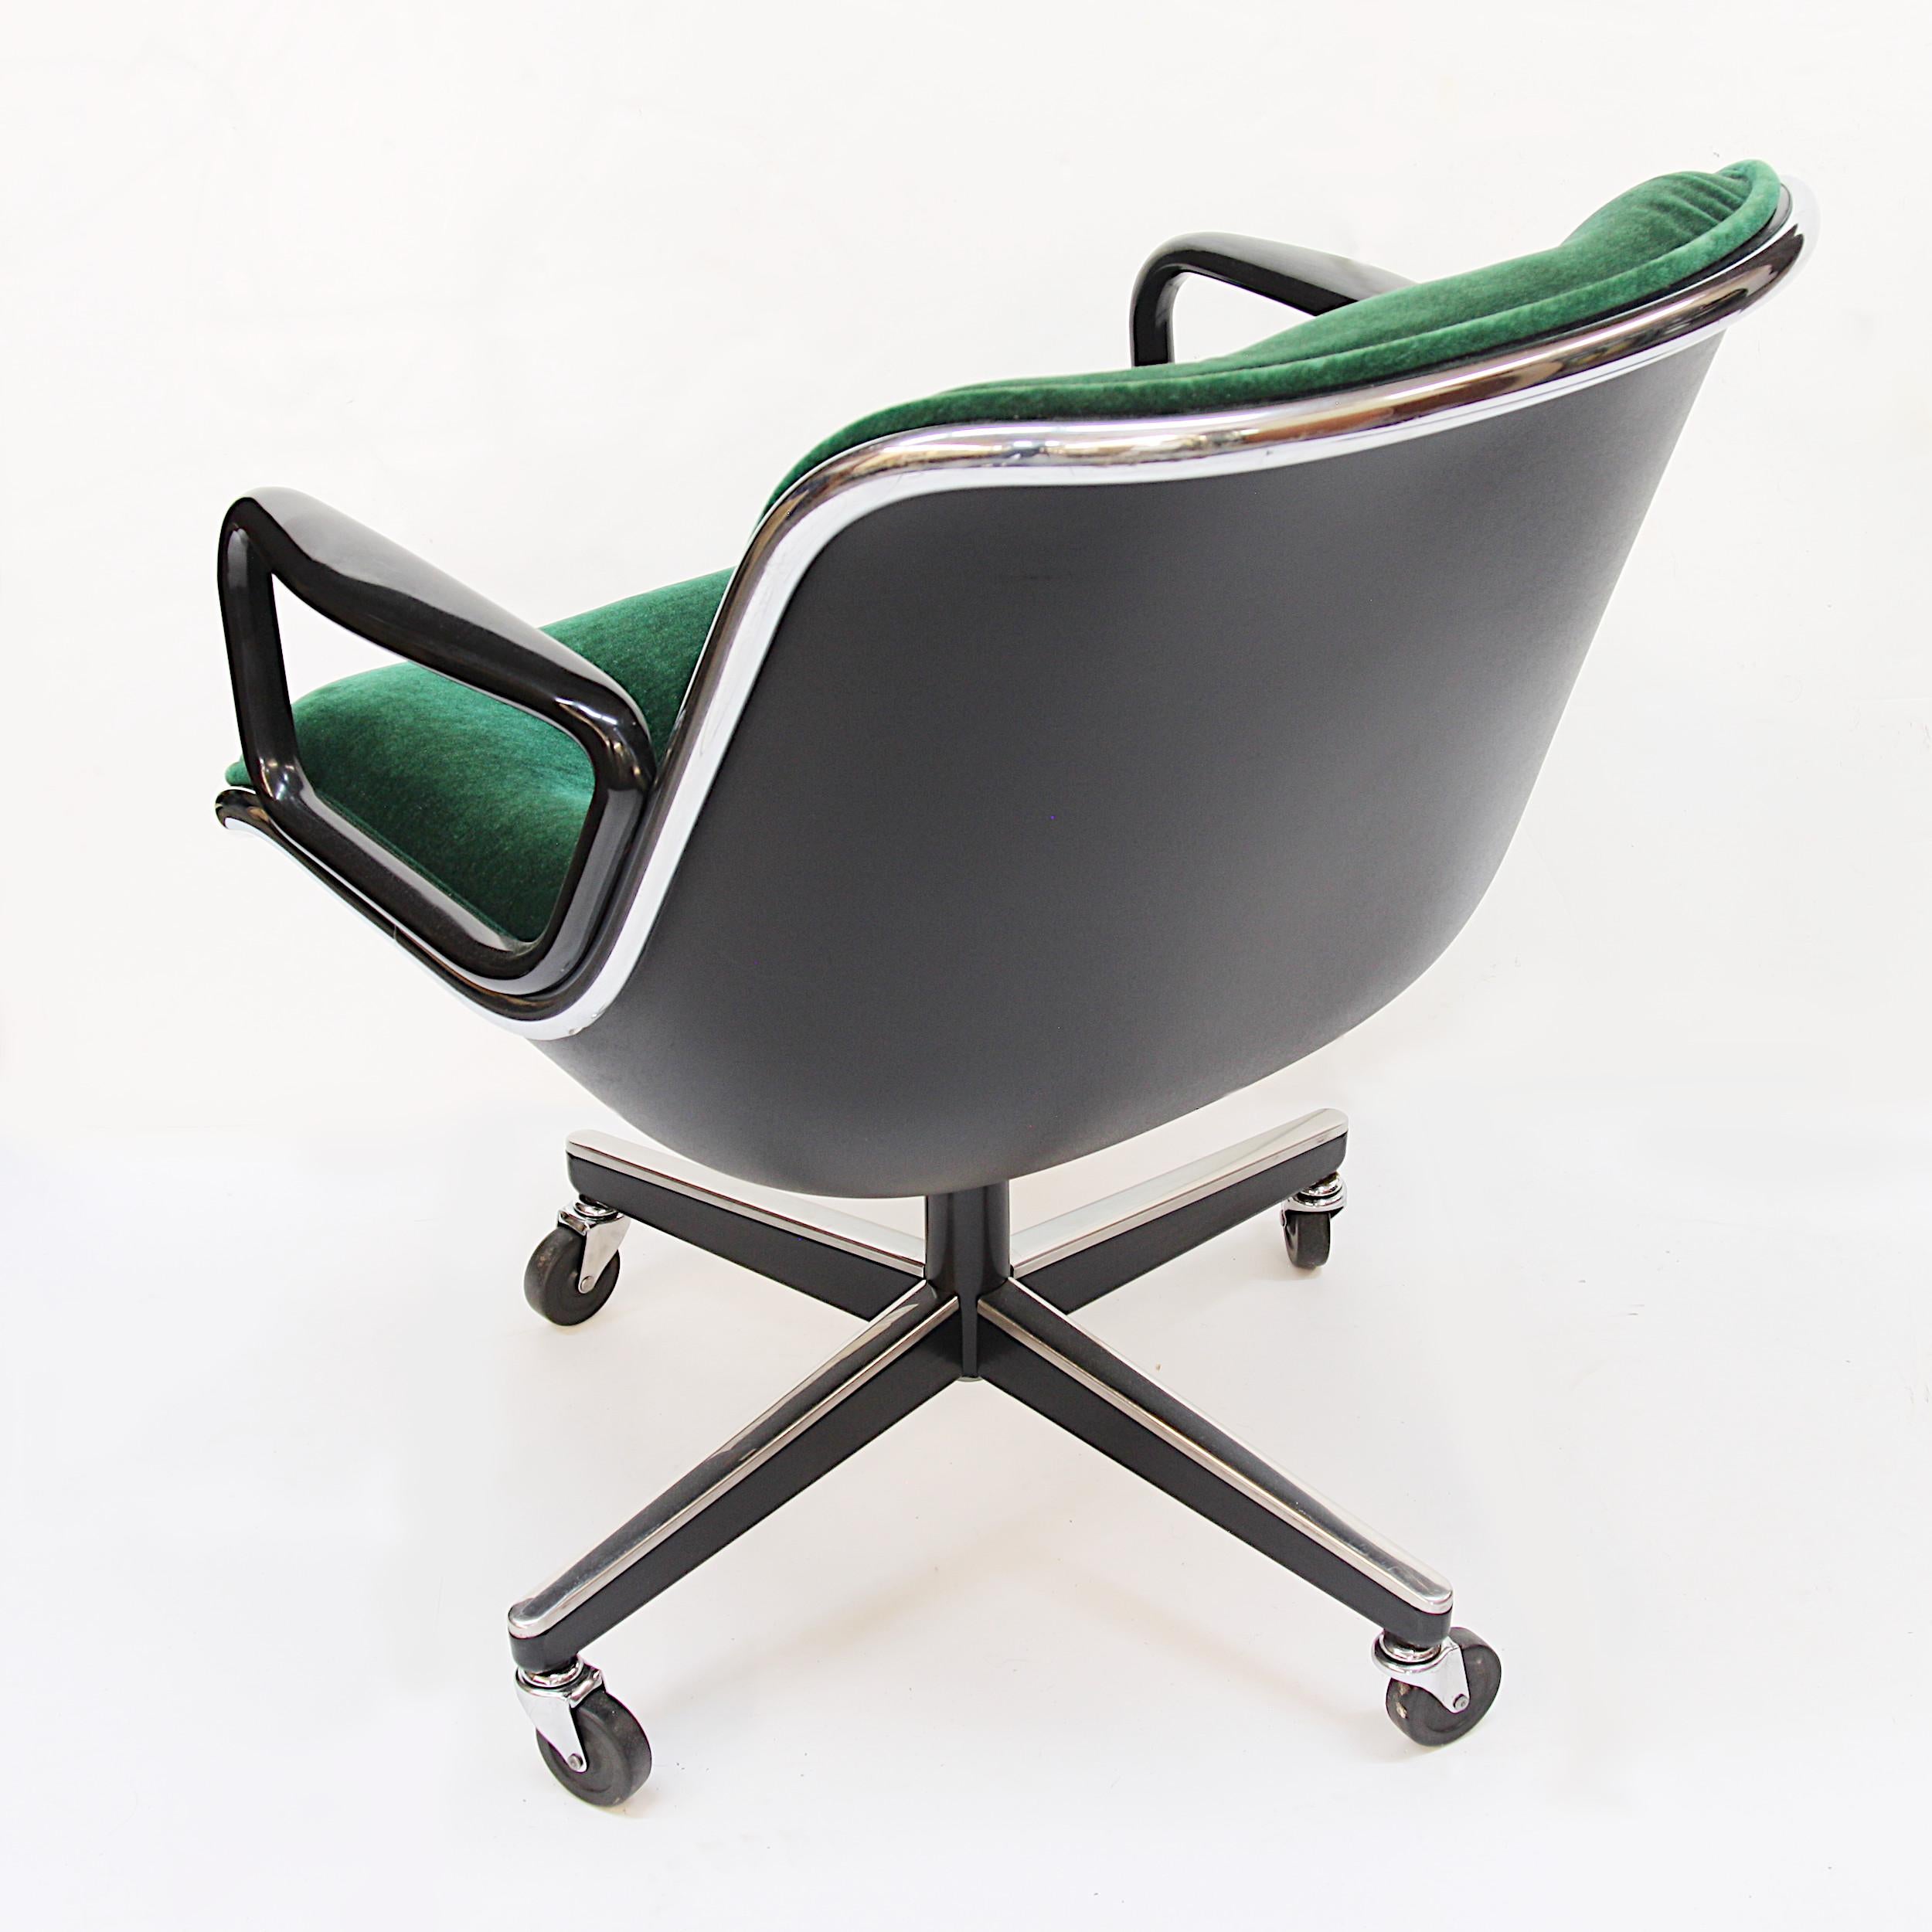 This is an exceptional original example of the iconic Pollock desk chair finished in a rare, emerald green velour. That fantastic green velour will beautifully set off your midcentury desk and sit just as beautifully... This thing is comfy!